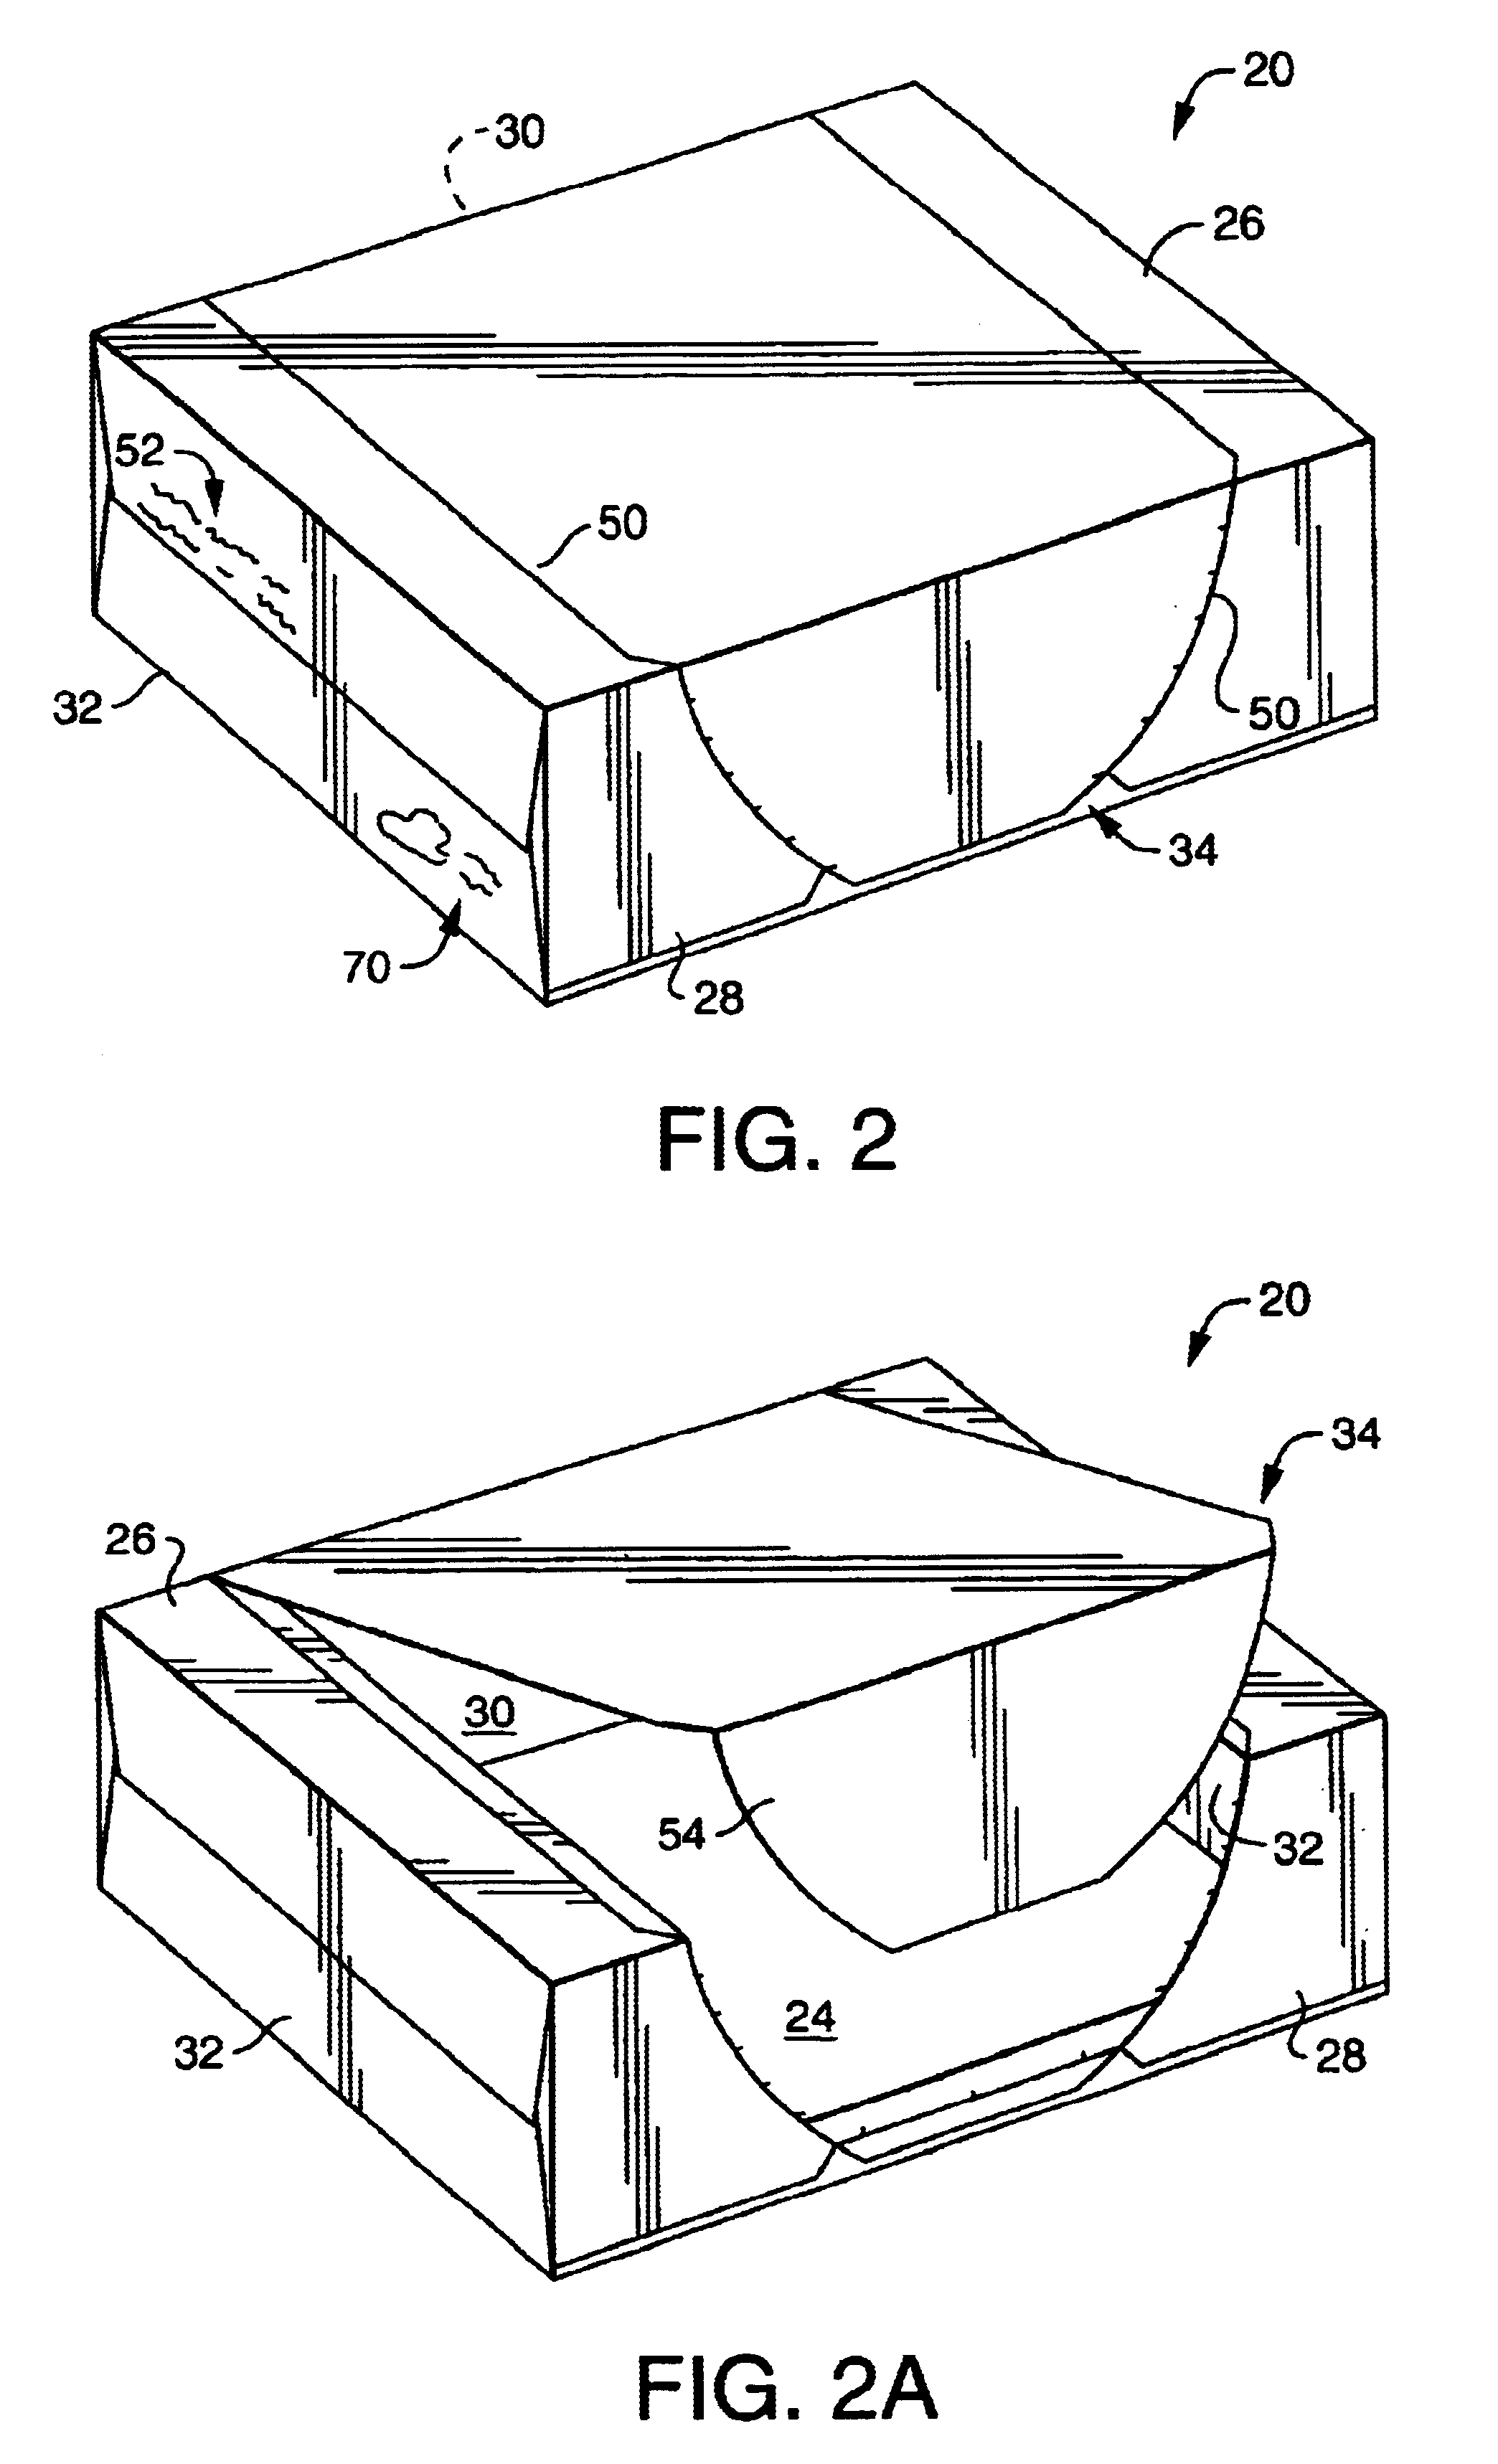 Package having an opening mechanism and containing selectively oriented absorbent articles